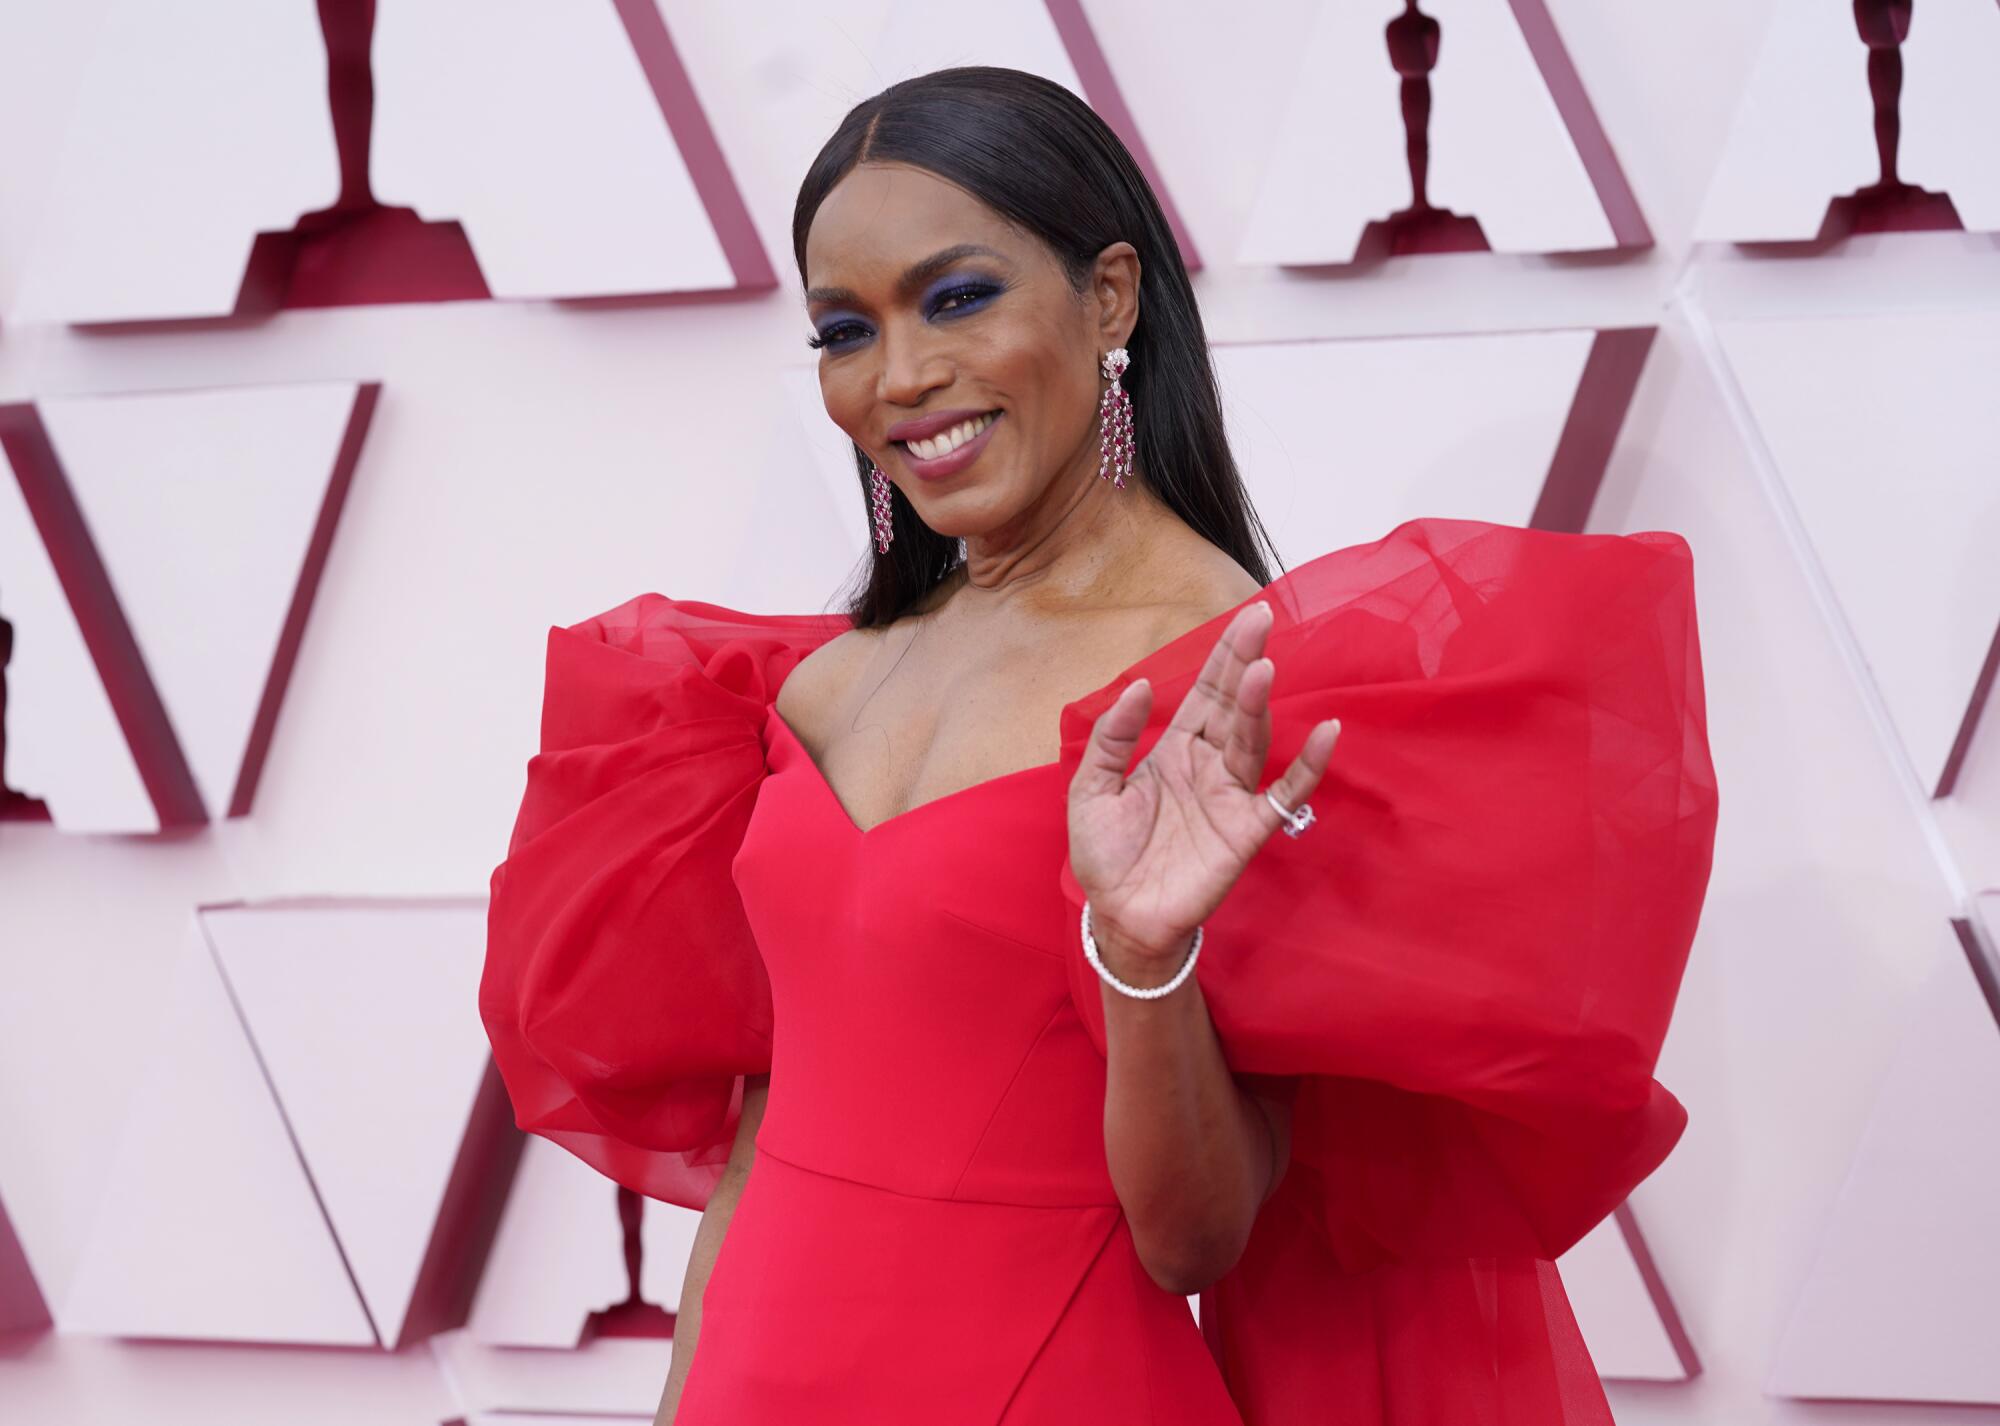 Angela Bassett wears a red dress with poufy sleeves